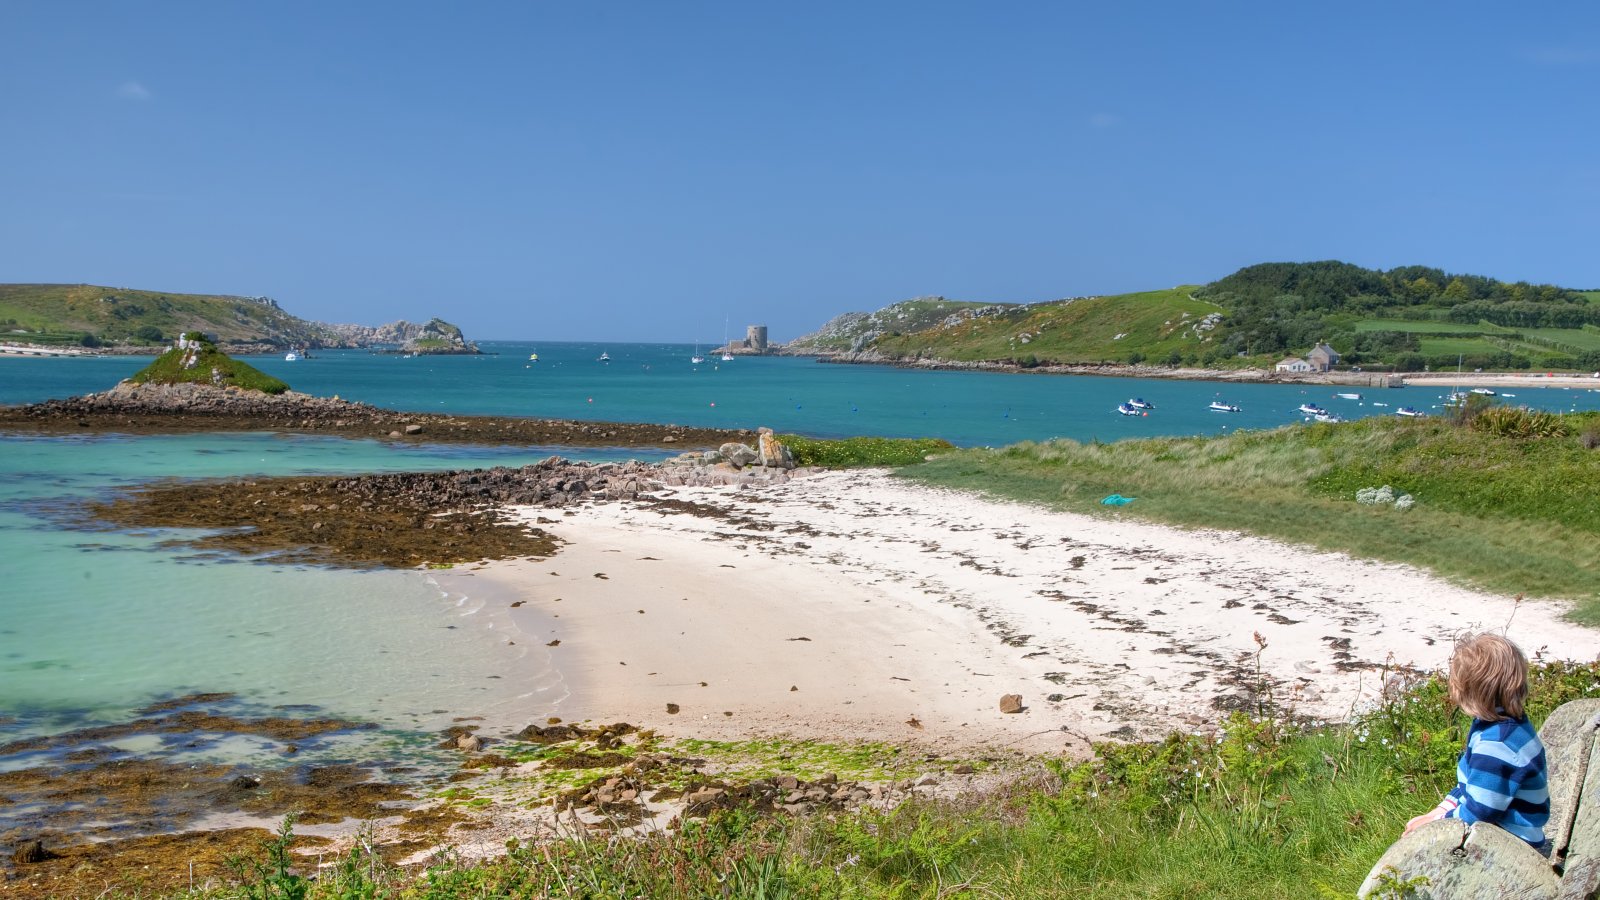 A day trip to the Isles of Scilly